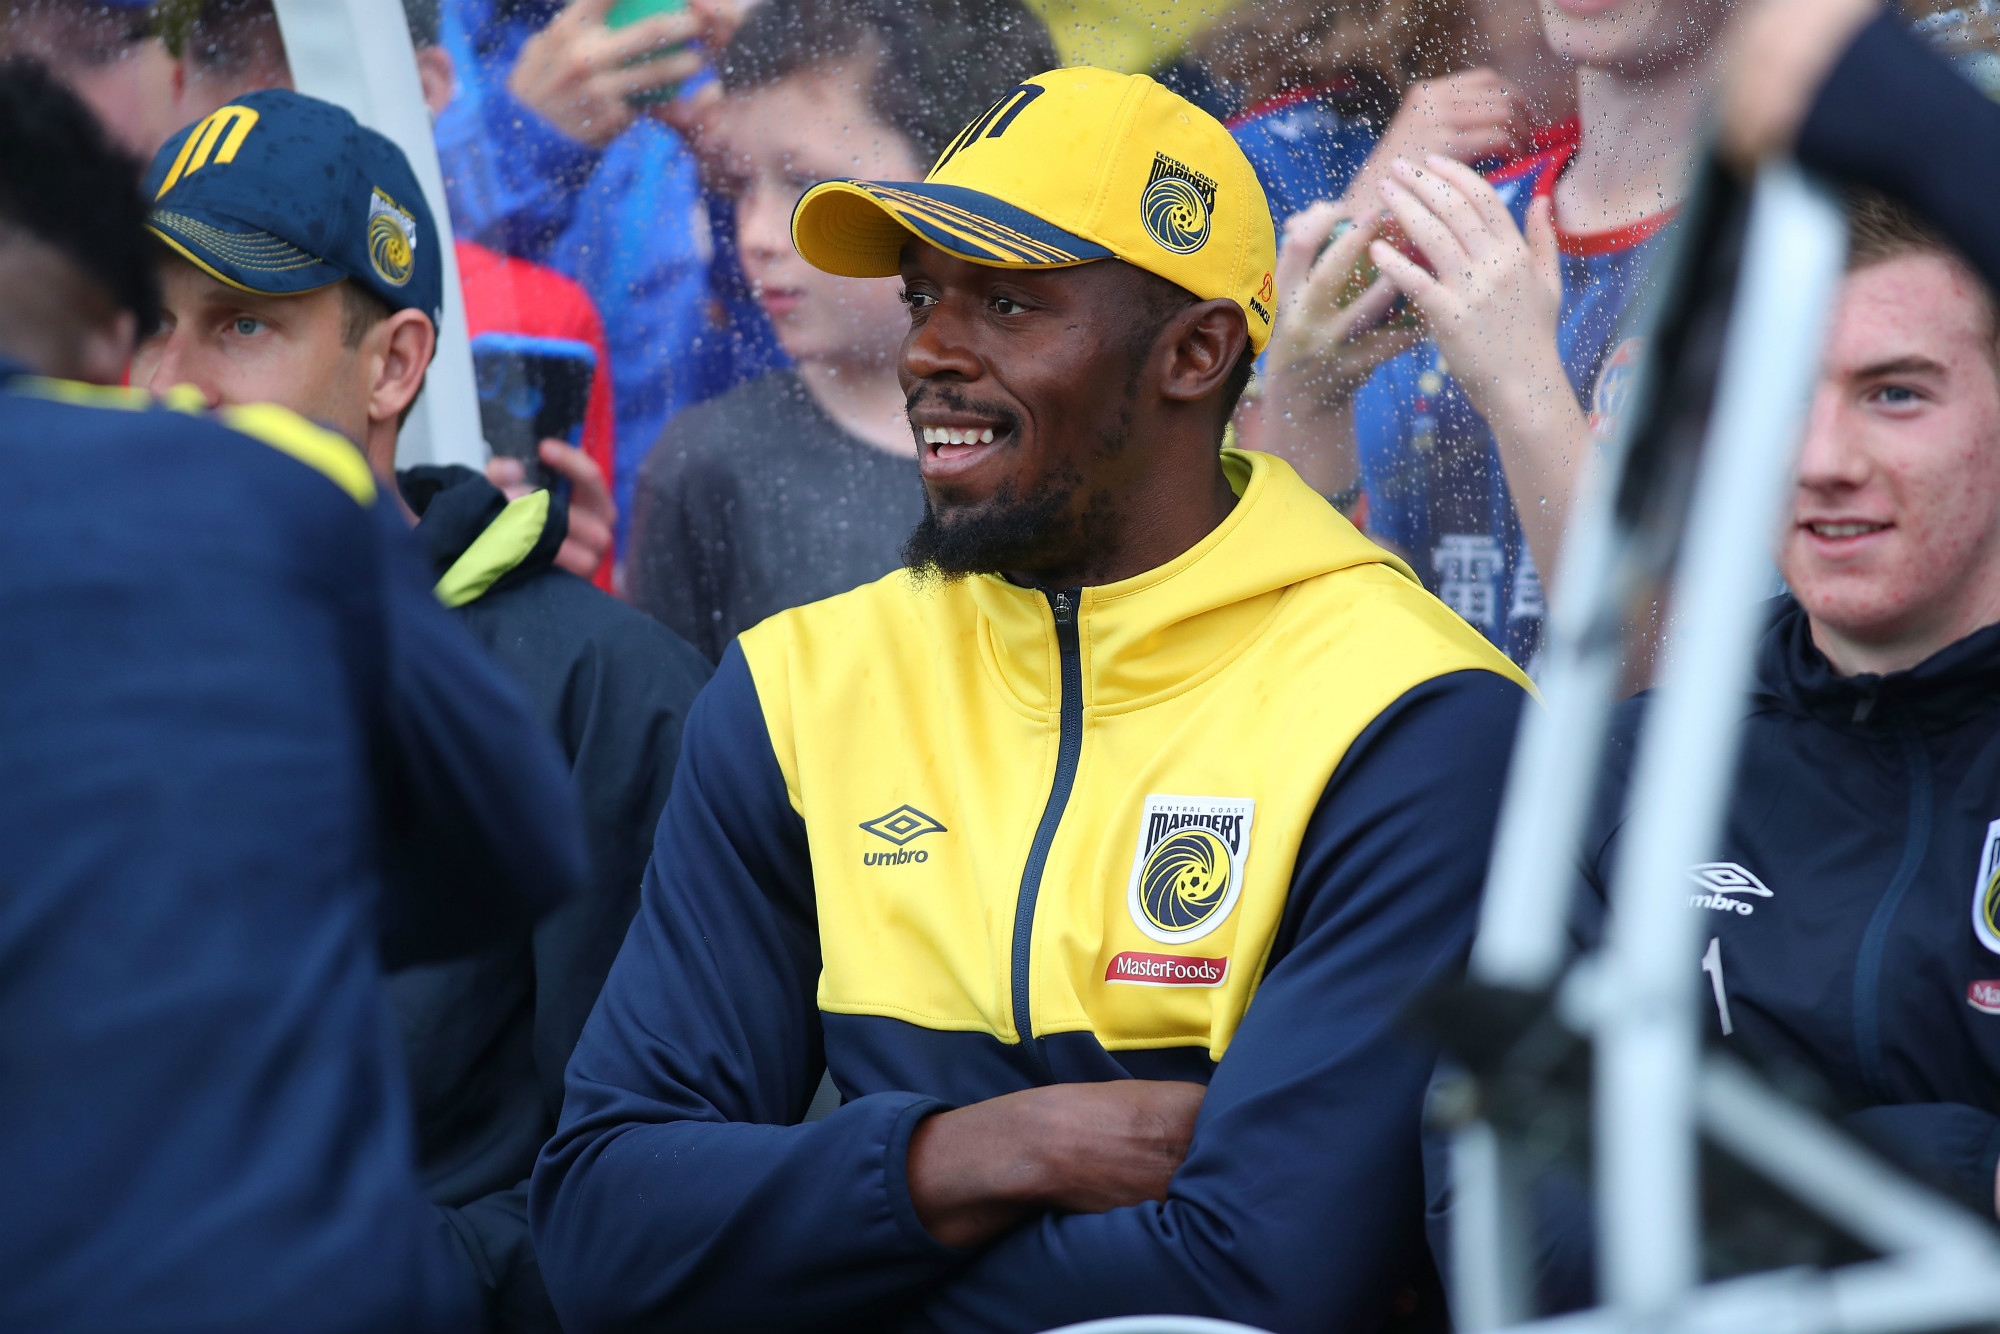 Bolt watches Mariners game with Jets